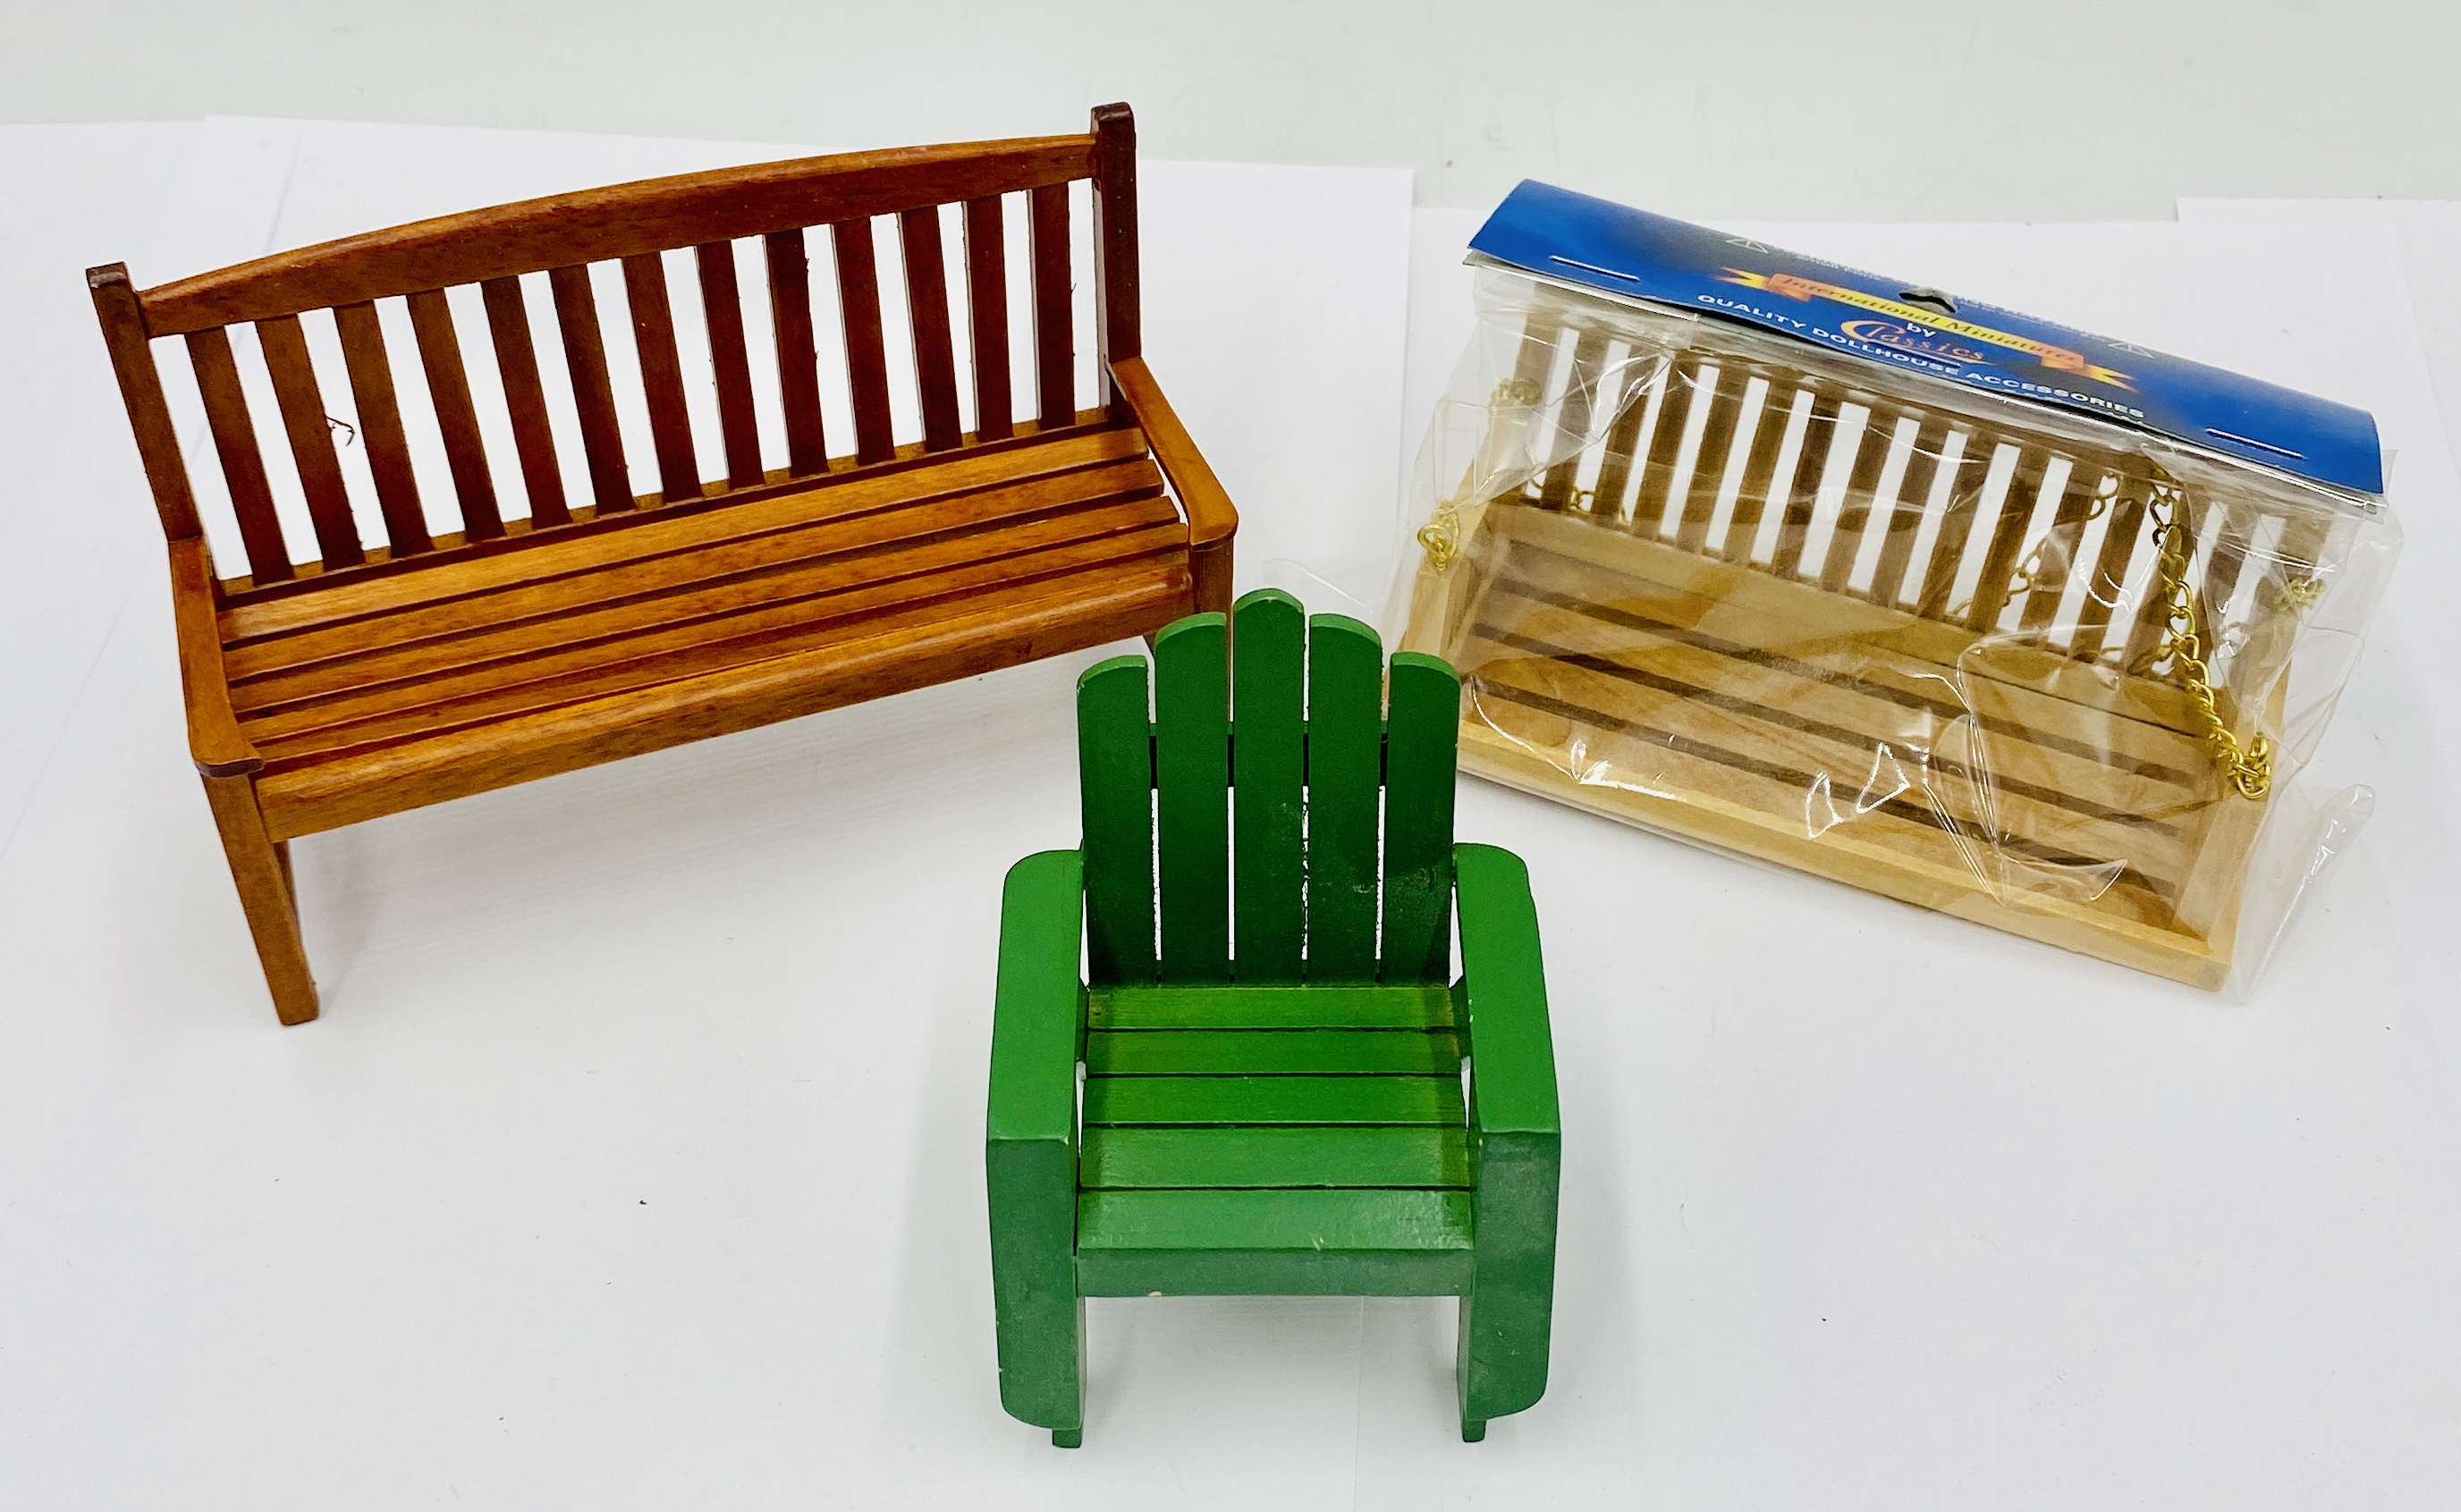 A collection of dolls house accessories relating to the garden including benches, porch swing, table - Image 4 of 5